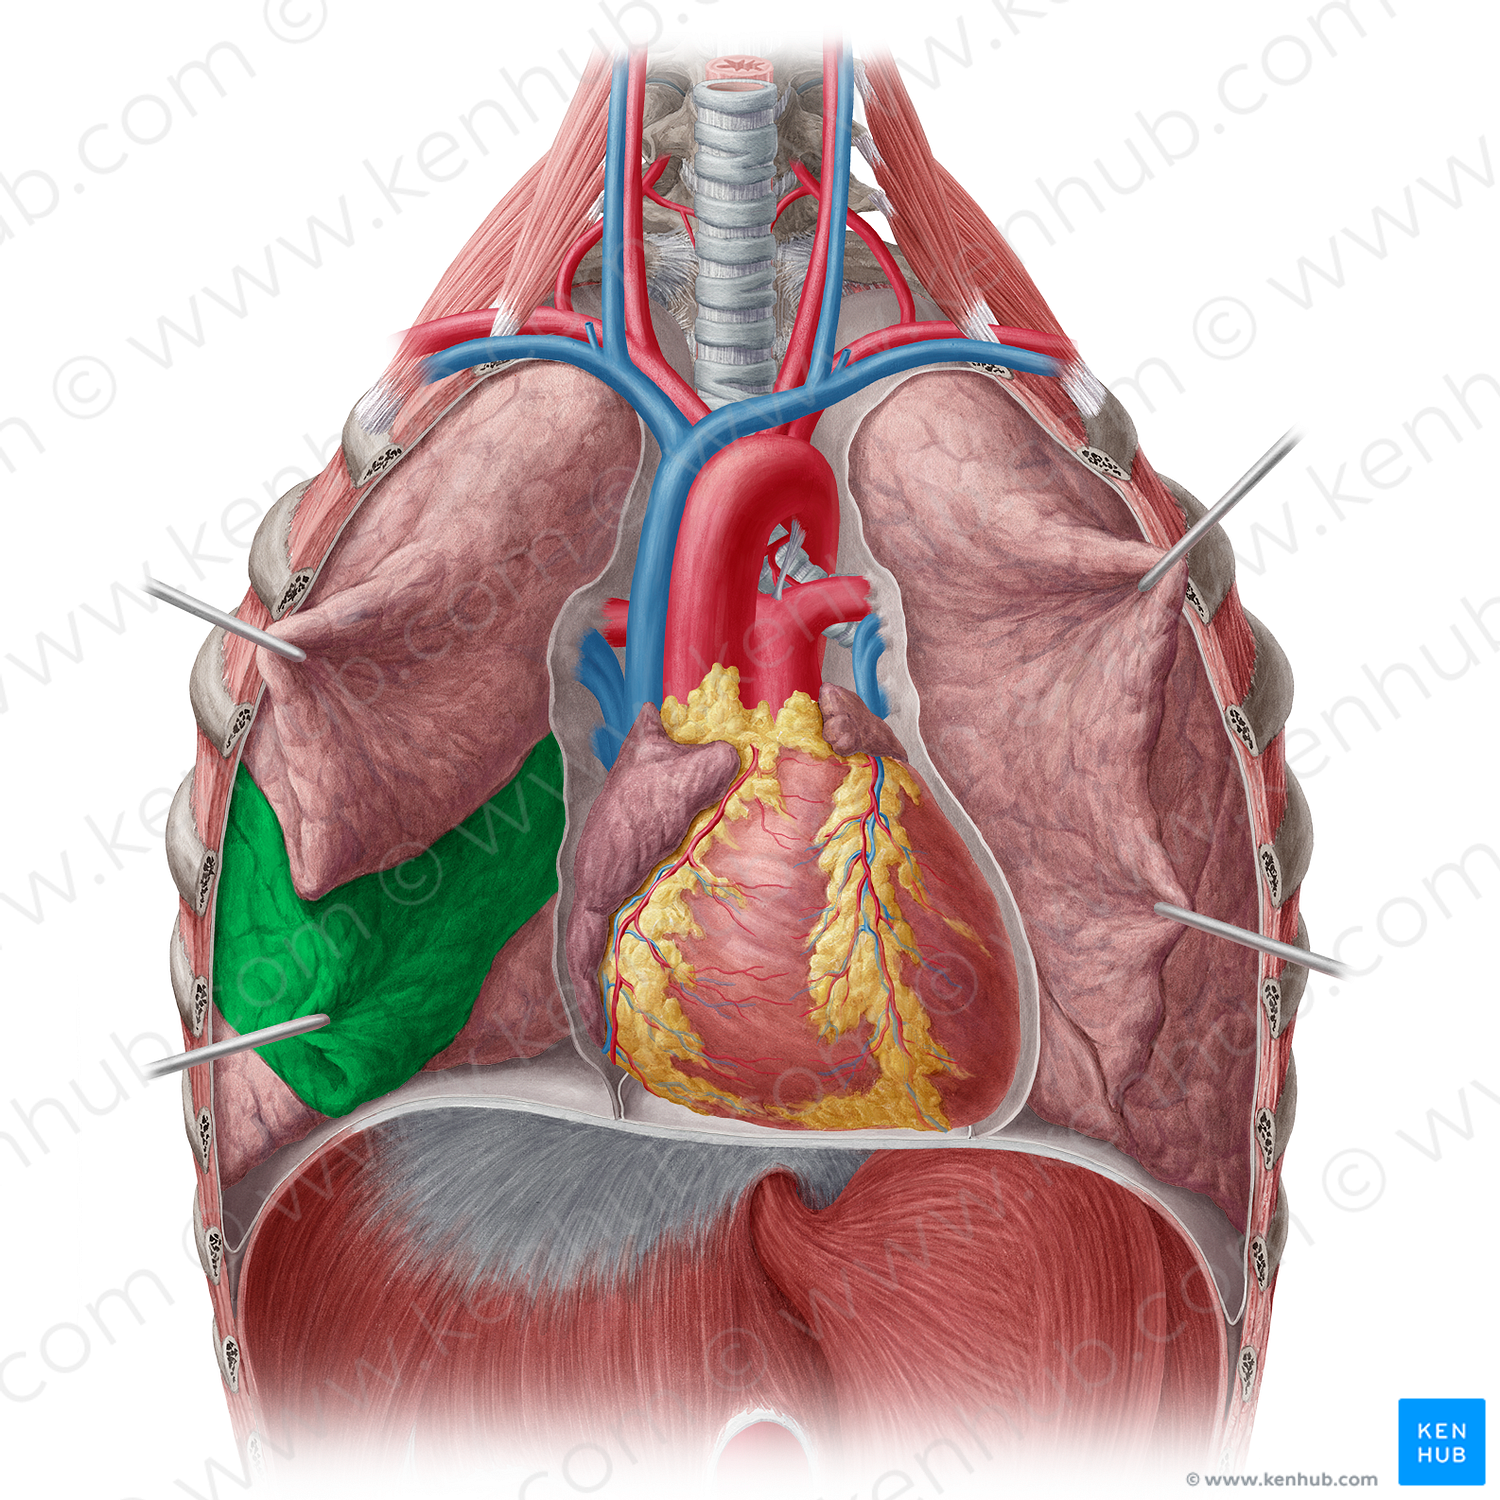 Middle lobe of right lung (#4837)